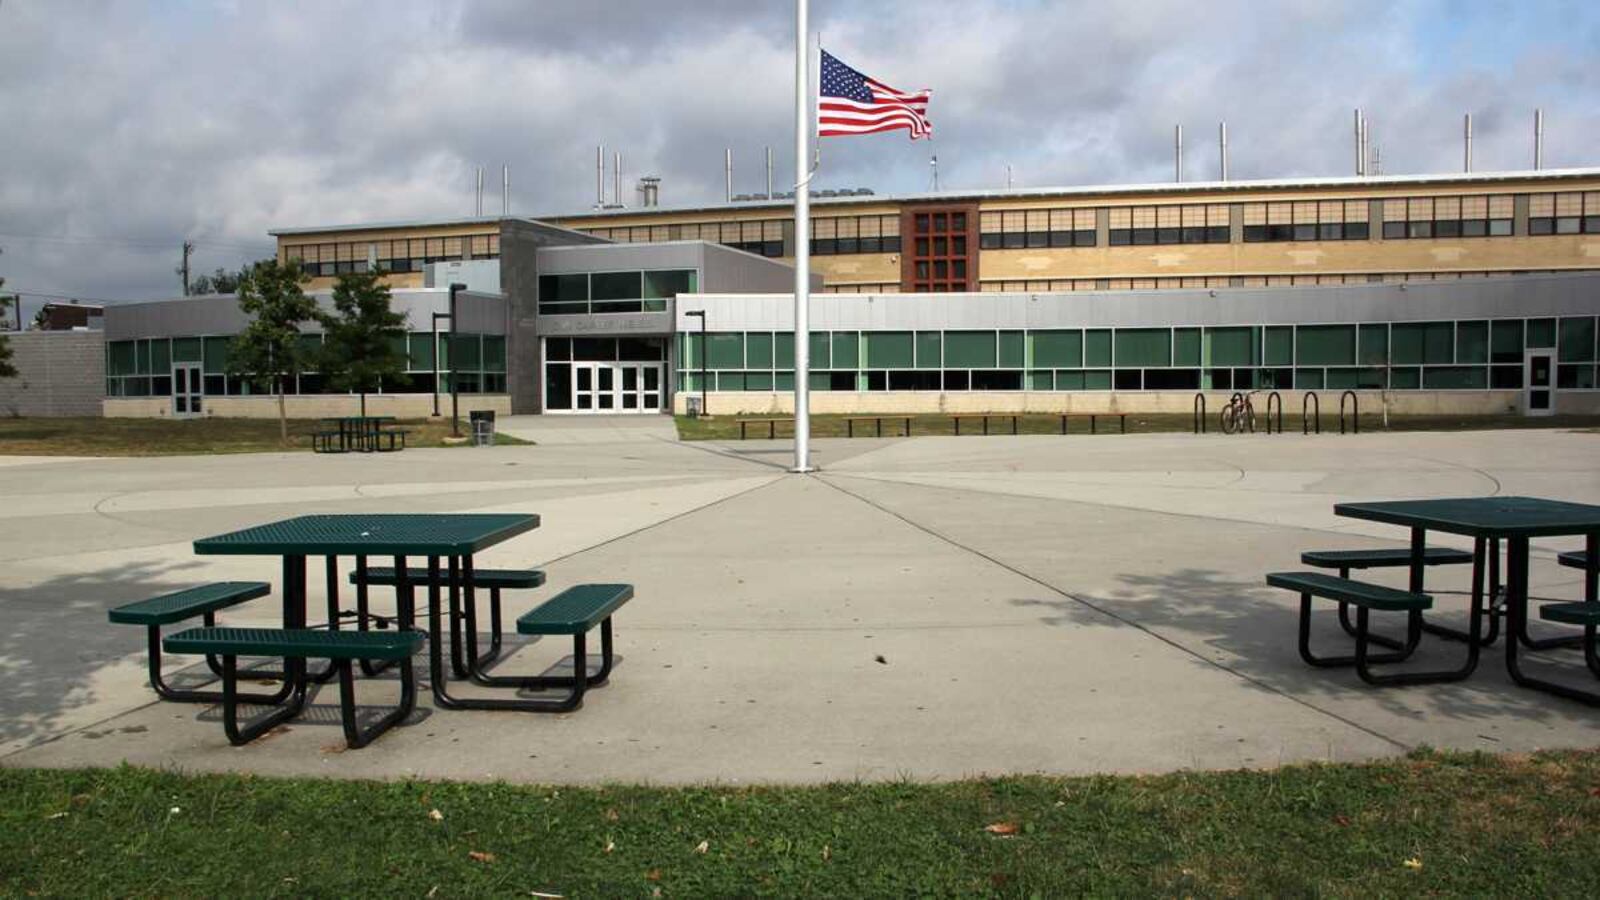 The exterior of Carver High School in Philadelphia, with small picnic tables in the foreground and a U.S. flag flying on a flagpole.